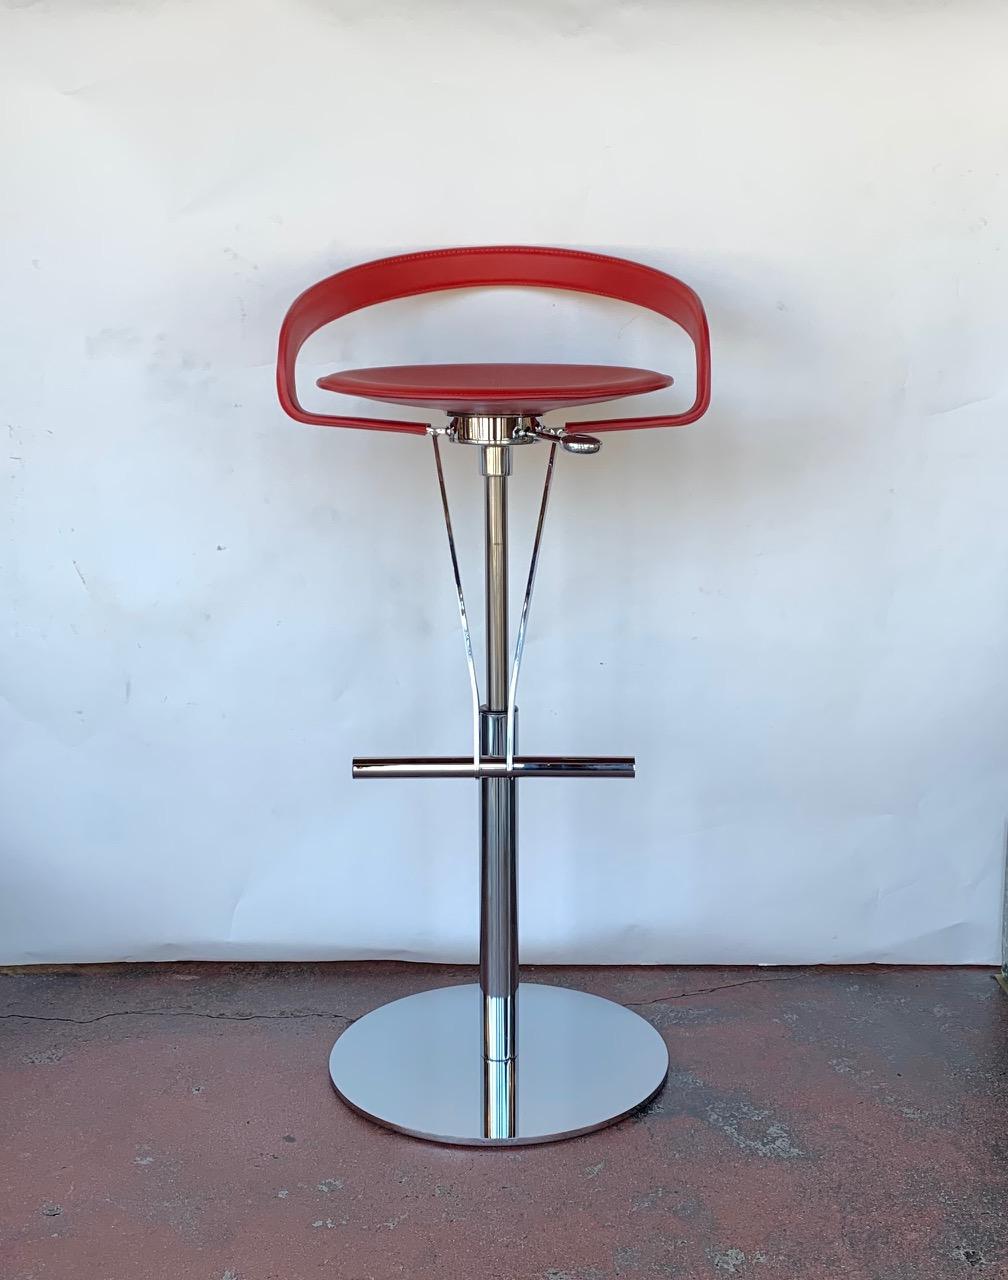 Set of five Cayman bar stools by Fasem. Manufactured in Italy by Fasem who has been, for over 20 years, Italy's leader in the production of quality leather seating.
Measure: Lowest seat height 30 in.
Highest seat height 40 in.
     